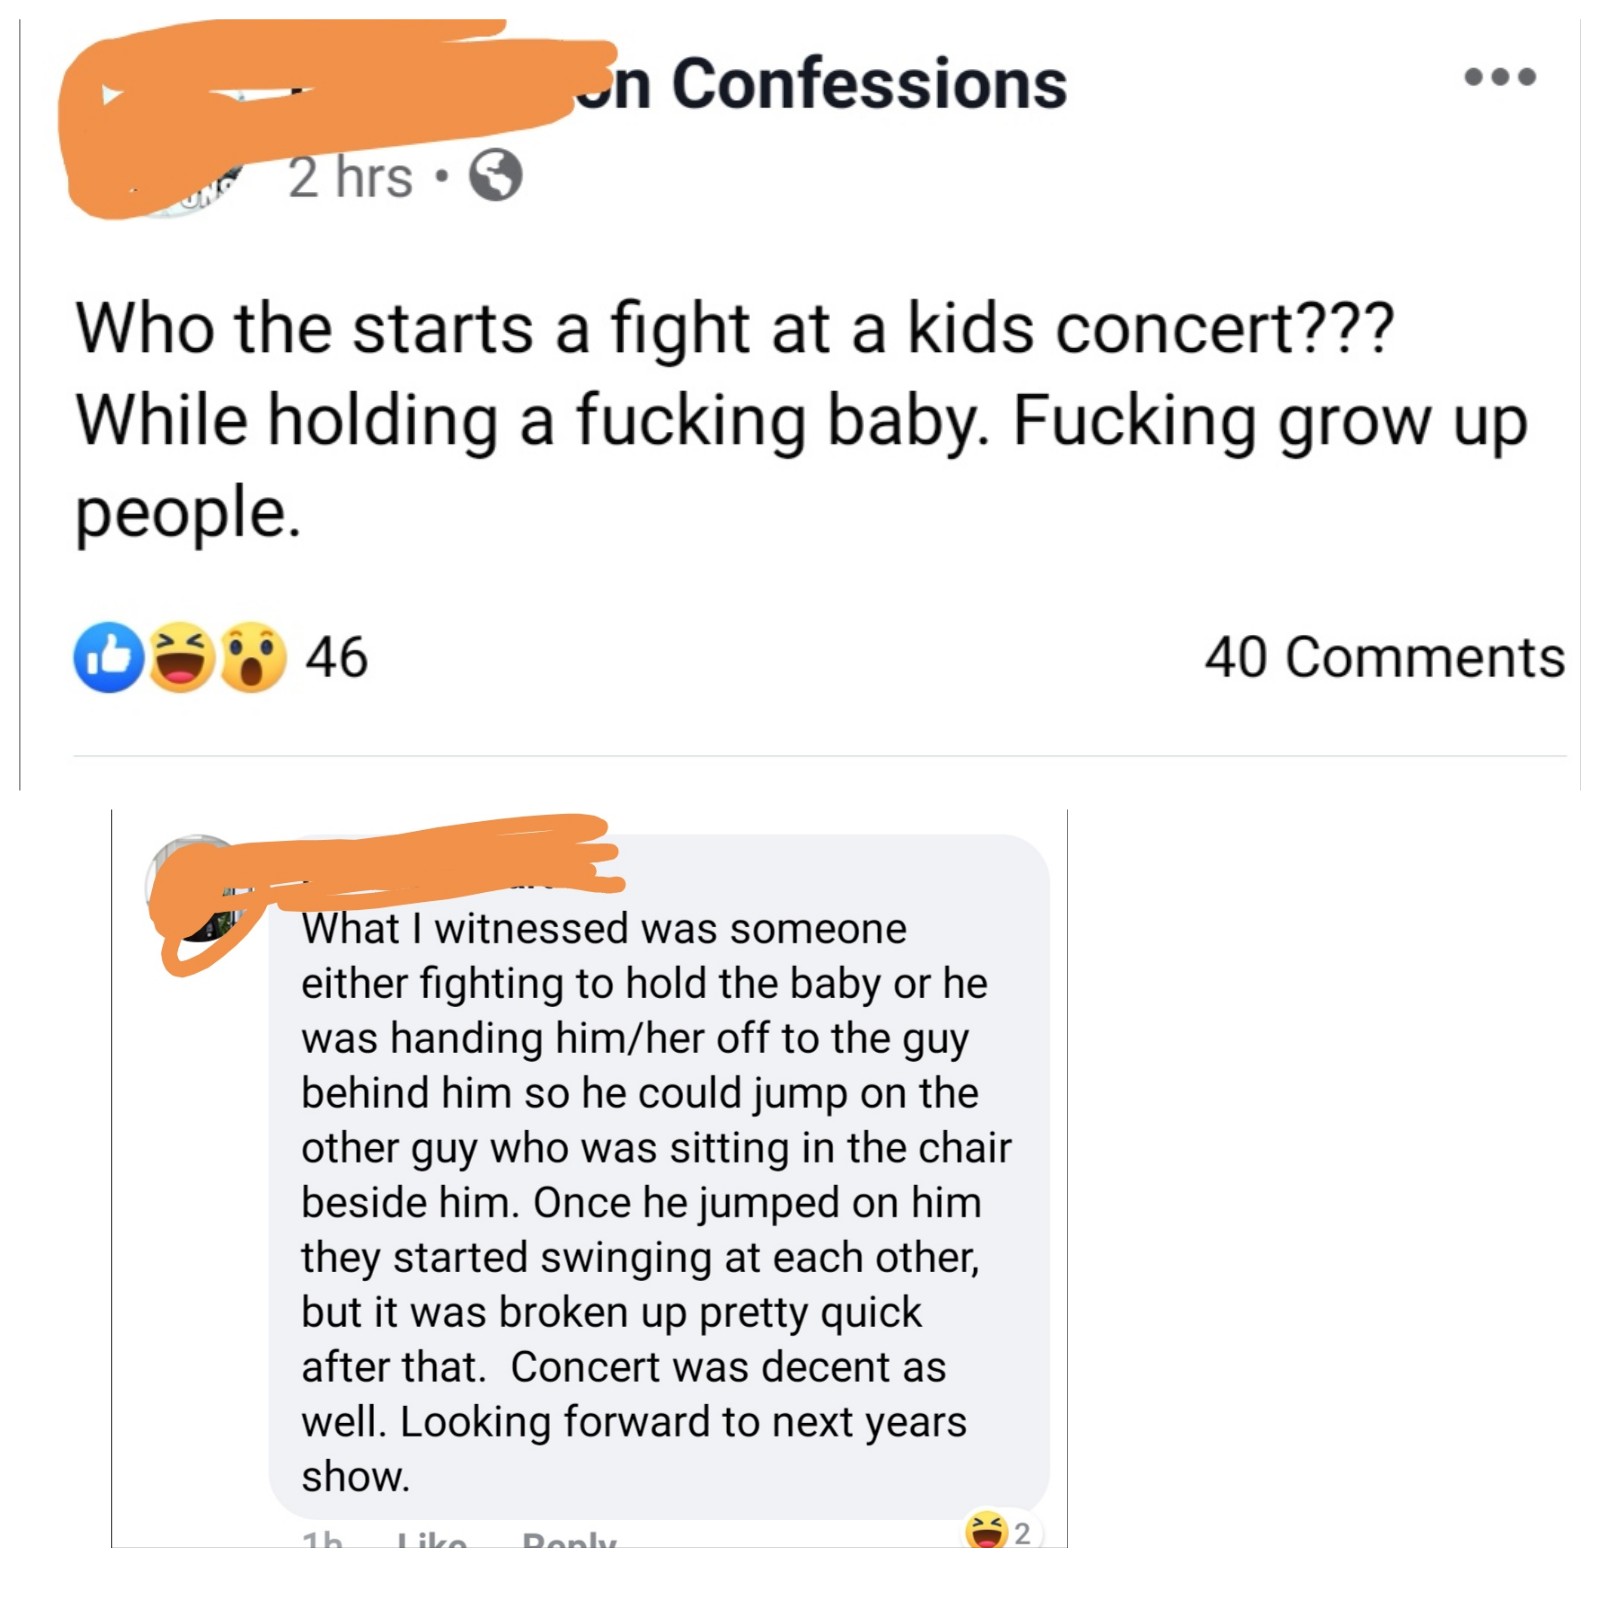 angle - un Confessions urile 2 hrs Who the starts a fight at a kids concert??? While holding a fucking baby. Fucking grow up people. D 46 40 What I witnessed was someone either fighting to hold the baby or he was handing himher off to the guy behind him s